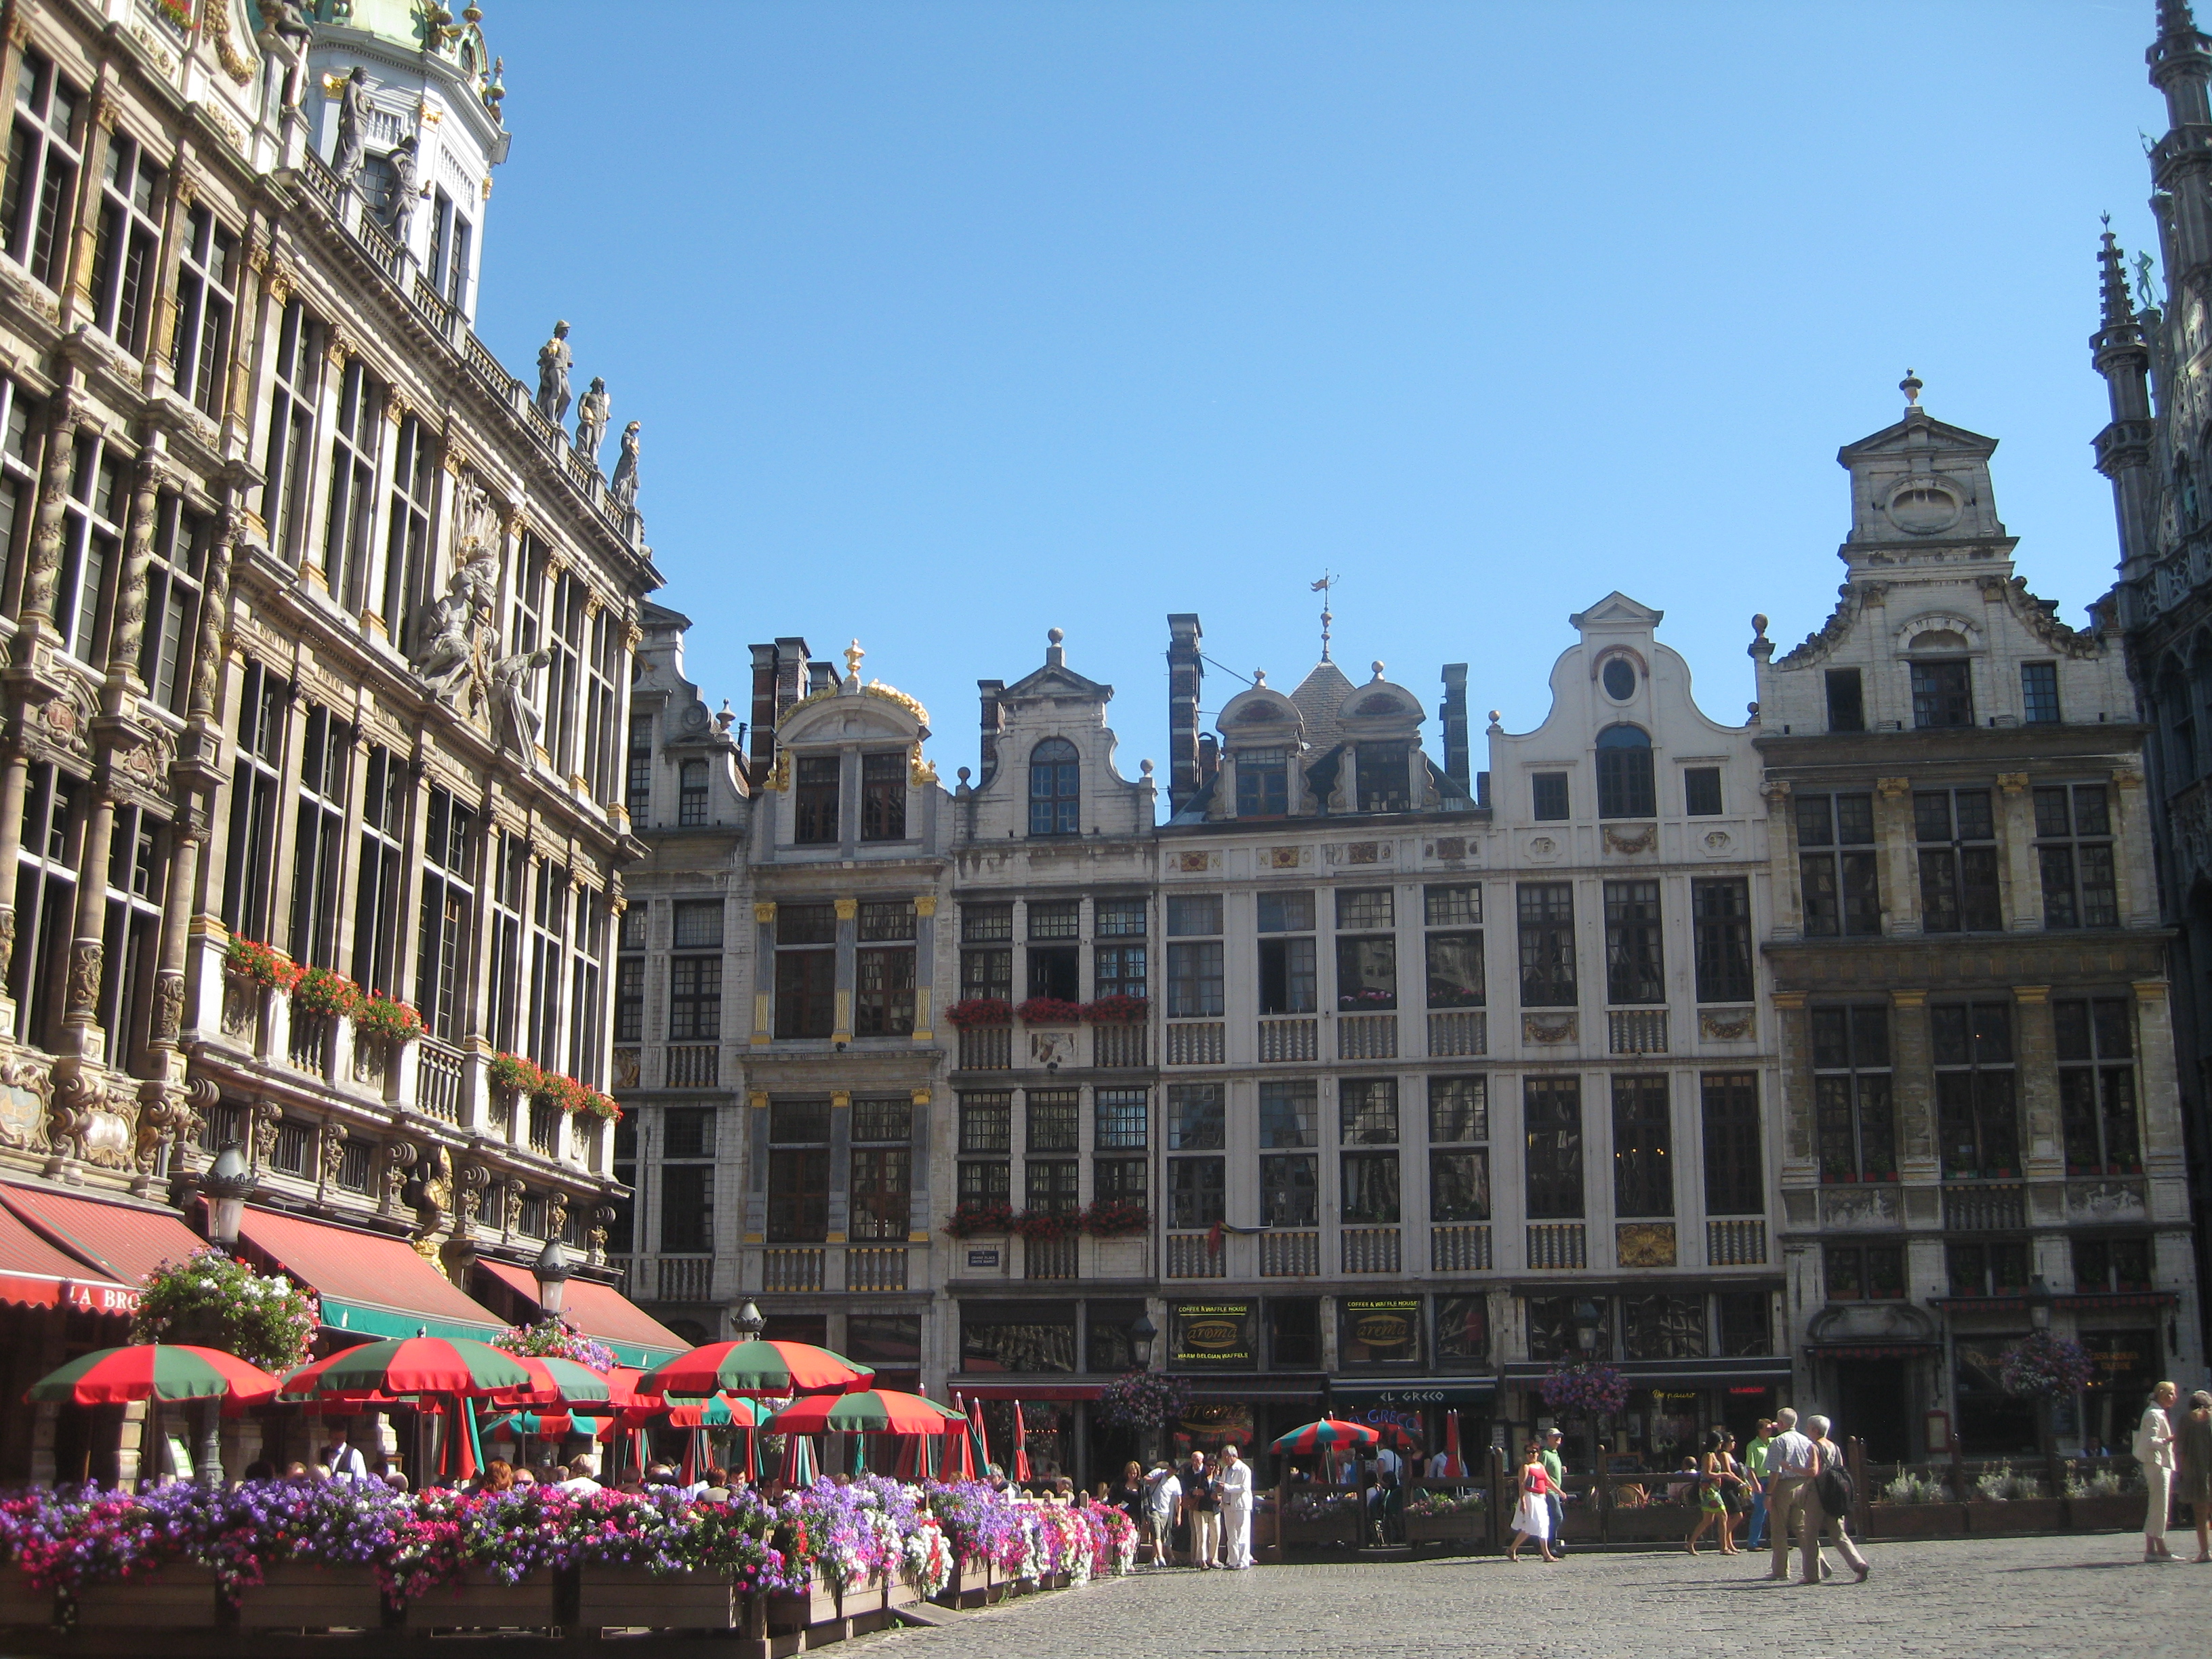 The Grand Place/Gros Markt of Brussels